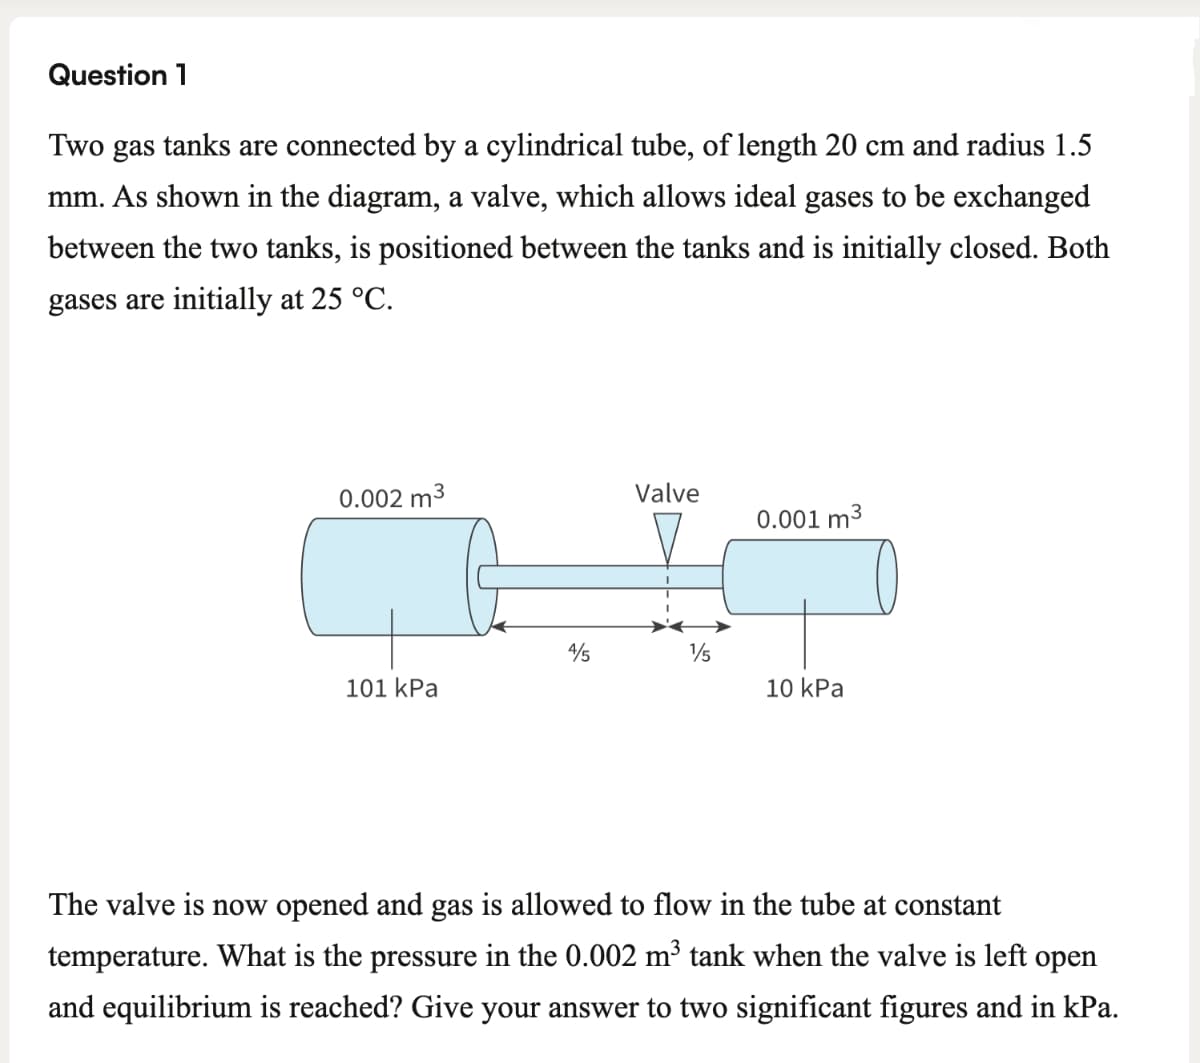 Question 1
Two gas tanks are connected by a cylindrical tube, of length 20 cm and radius 1.5
mm. As shown in the diagram, a valve, which allows ideal gases to be exchanged
between the two tanks, is positioned between the tanks and is initially closed. Both
gases are initially at 25 °C.
0.002 m³
Valve
0.001 m³
4/5
1/5
101 kPa
10 kPa
The valve is now opened and gas is allowed to flow in the tube at constant
temperature. What is the pressure in the 0.002 m³ tank when the valve is left open
and equilibrium is reached? Give your answer to two significant figures and in kPa.